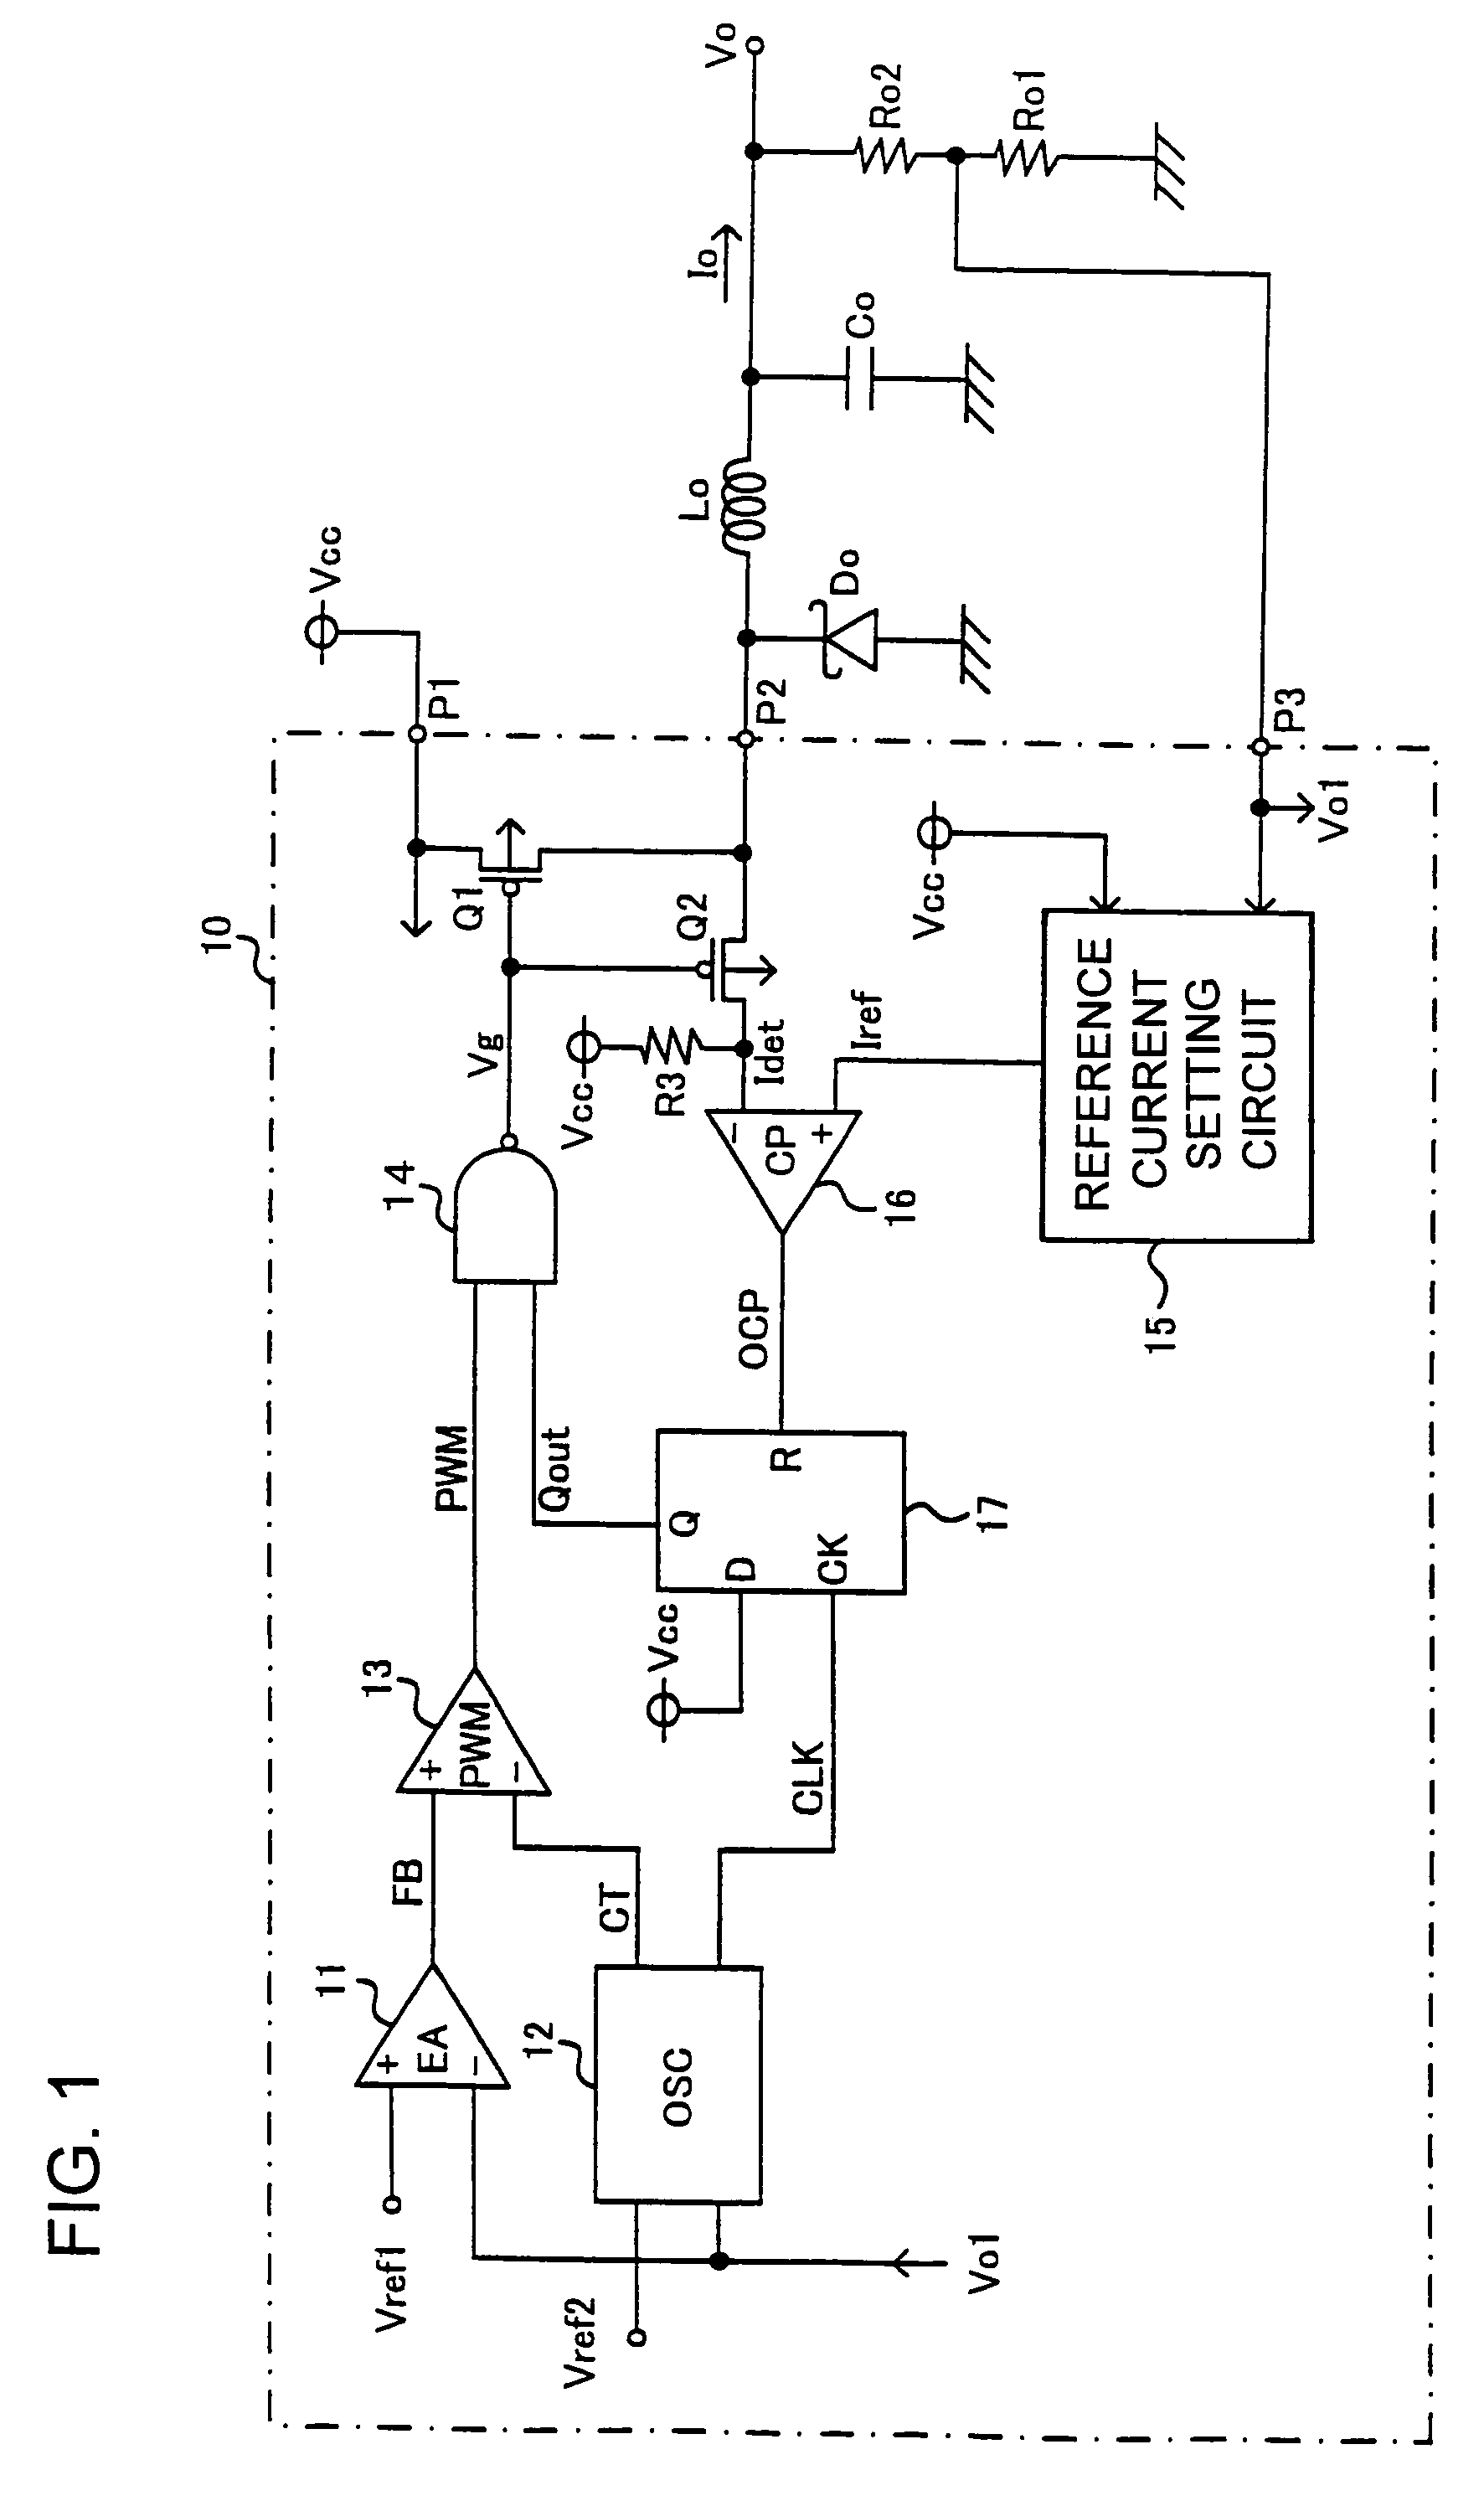 Switching type dc-dc converter for generating a constant output voltage